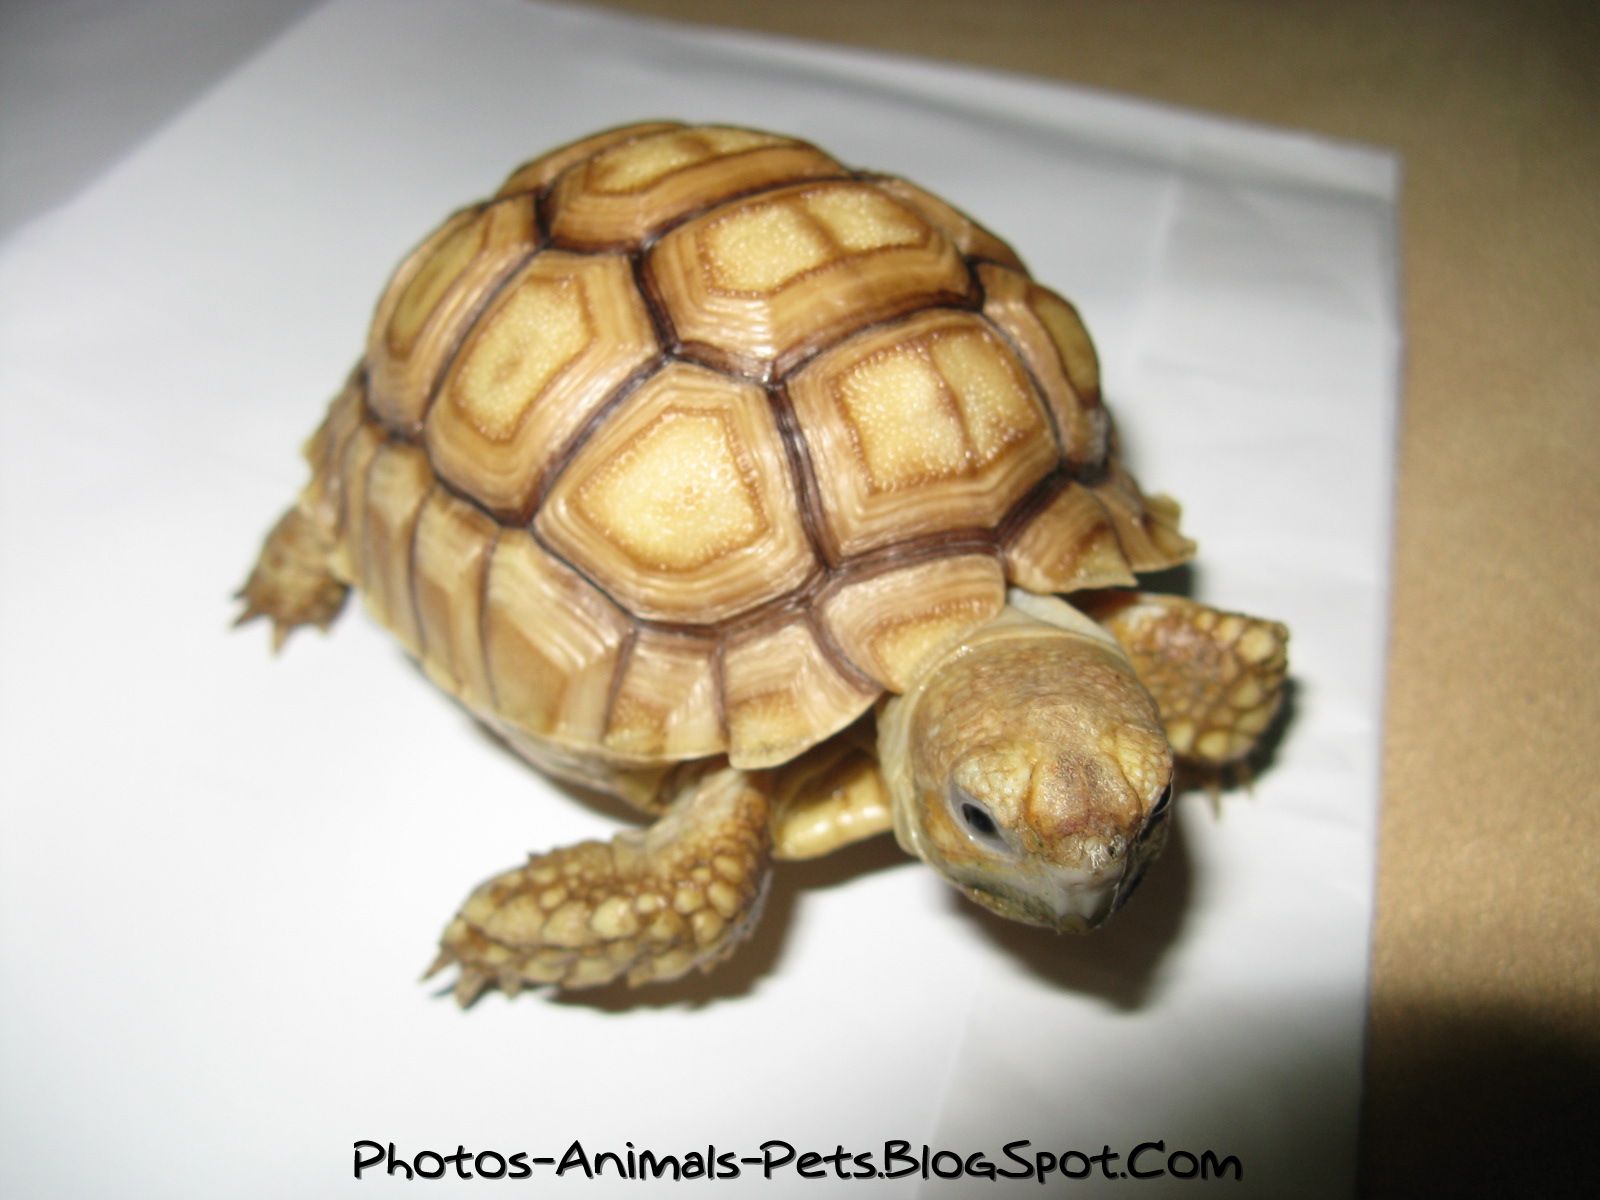 Cute Baby Pet Turtles Image Amp Pictures Becuo